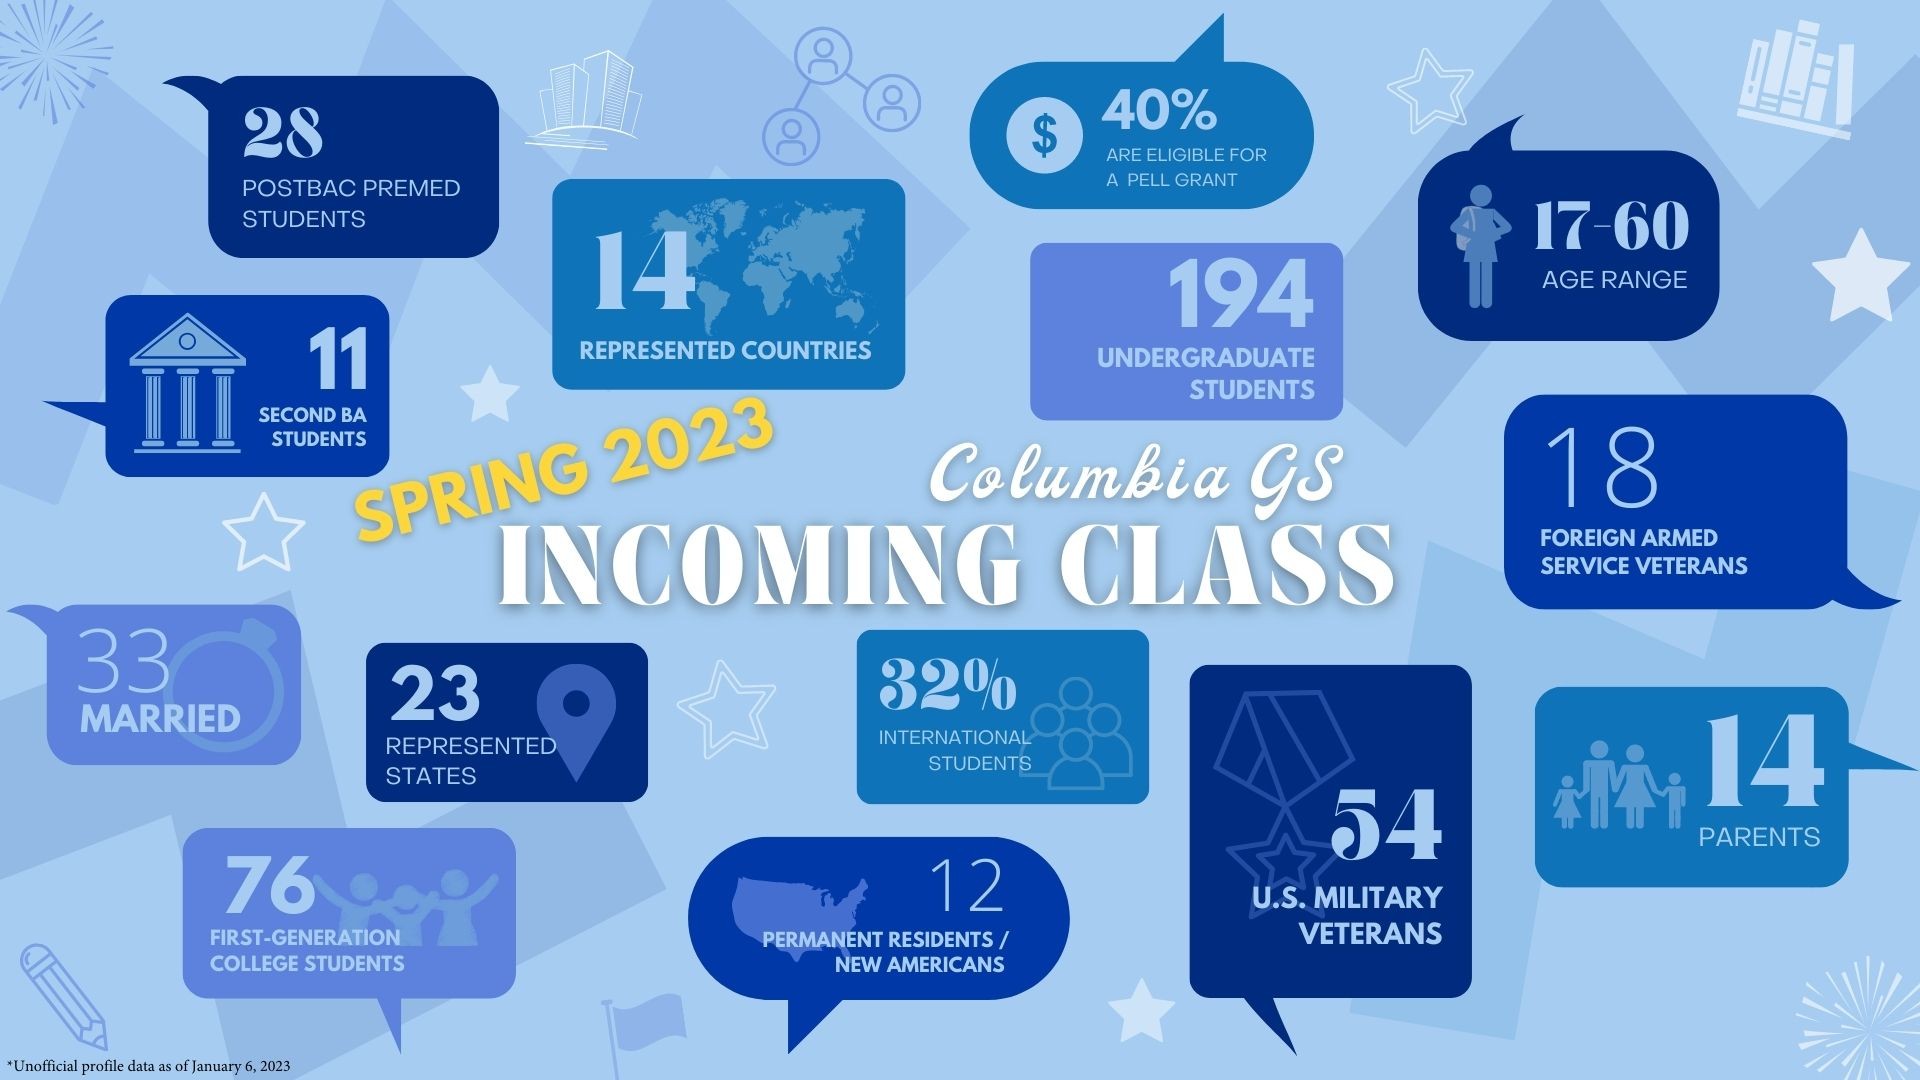 Spring 2023 Incoming Class Infographic